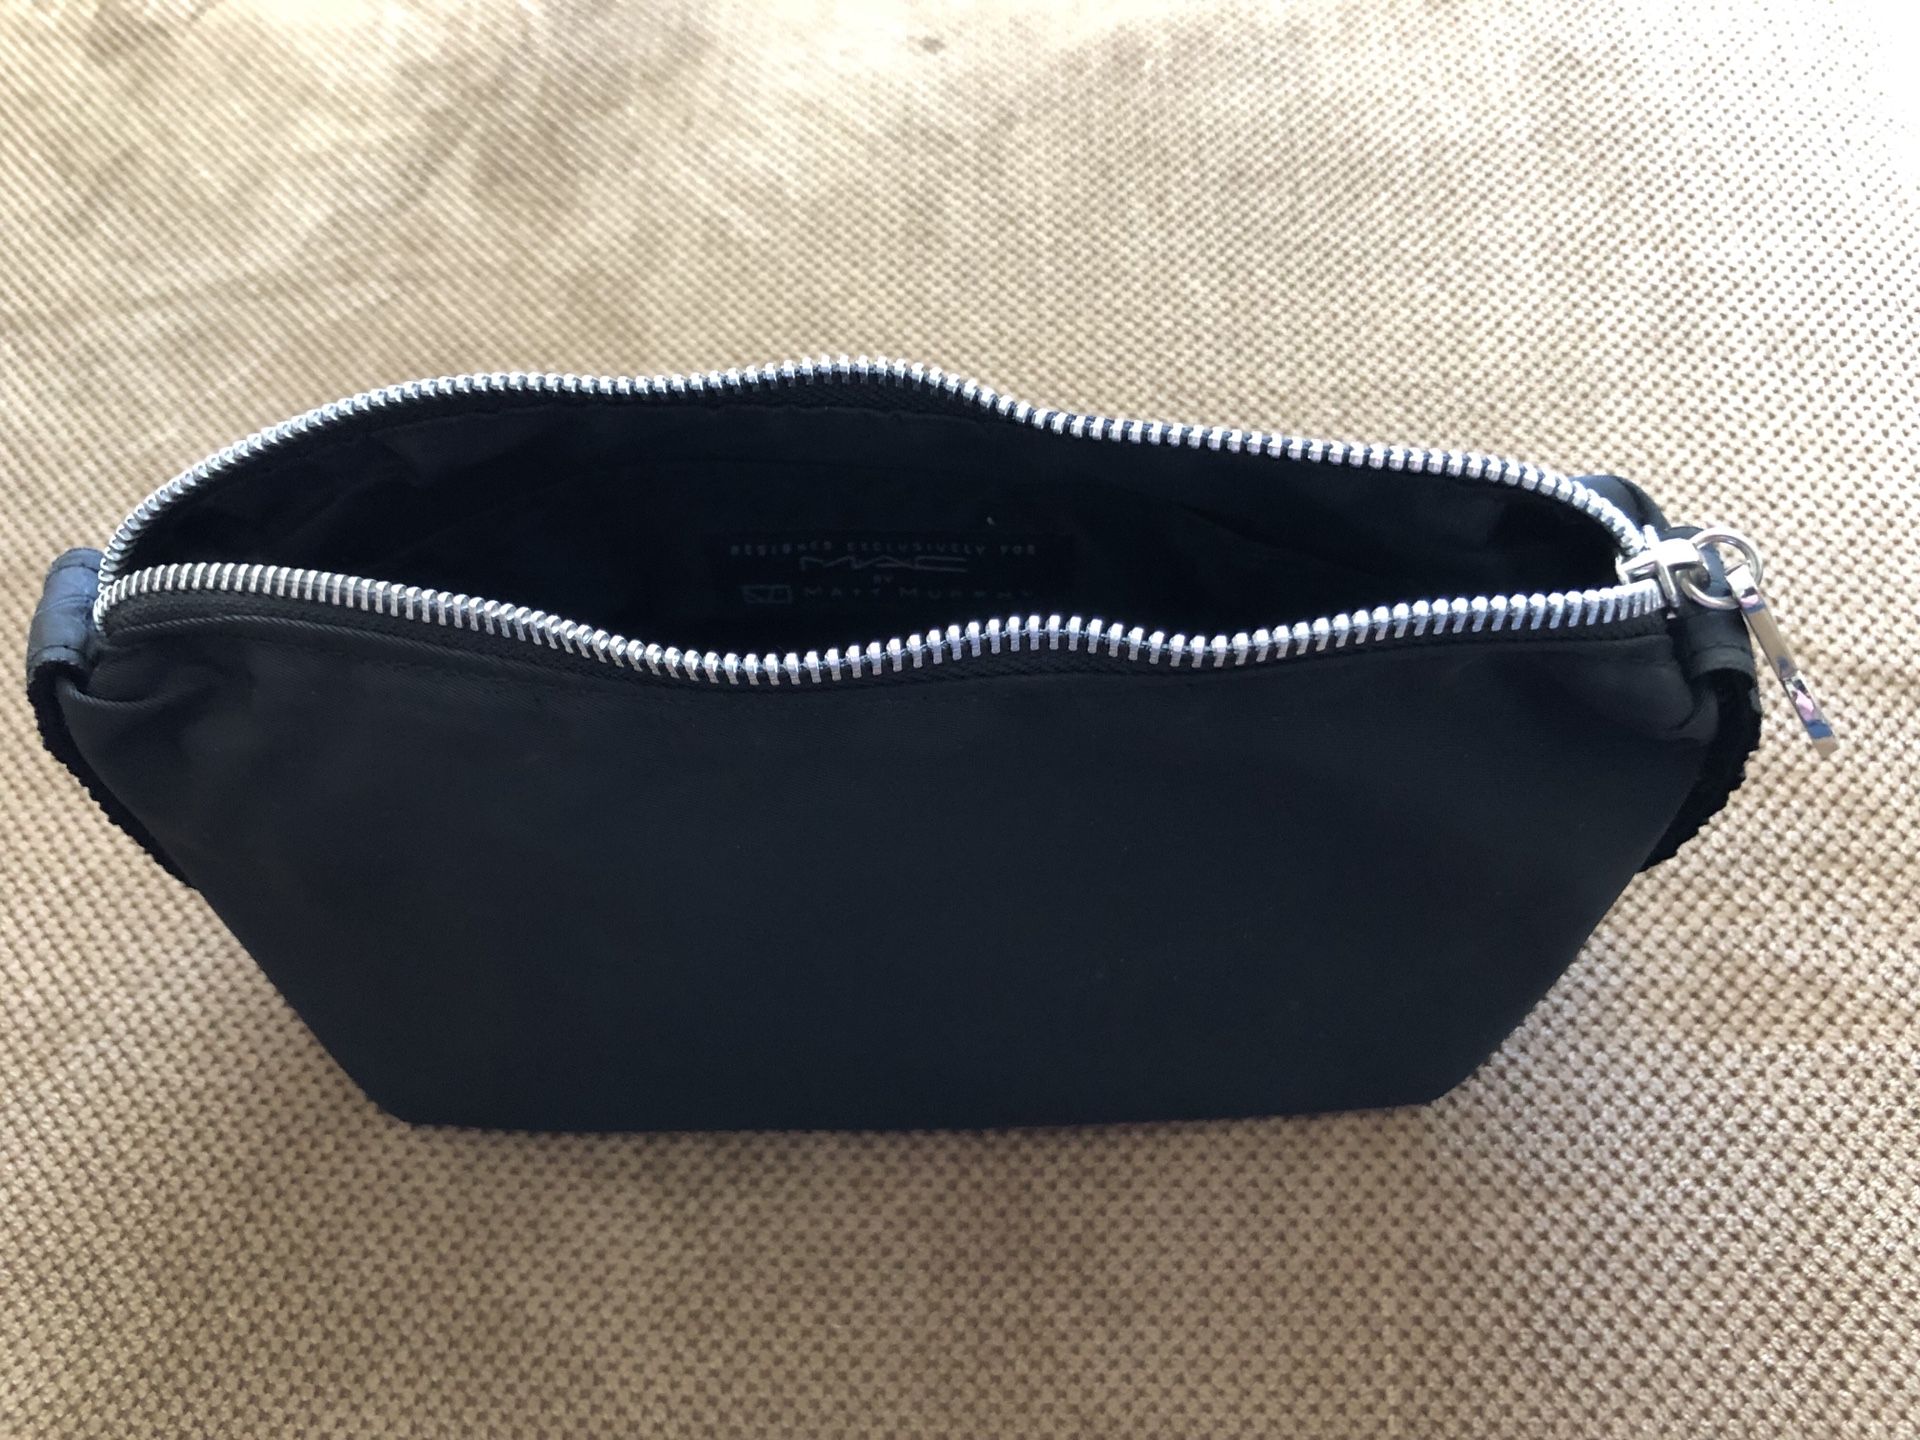 M.A.C makeup and LV cosmetic pouch